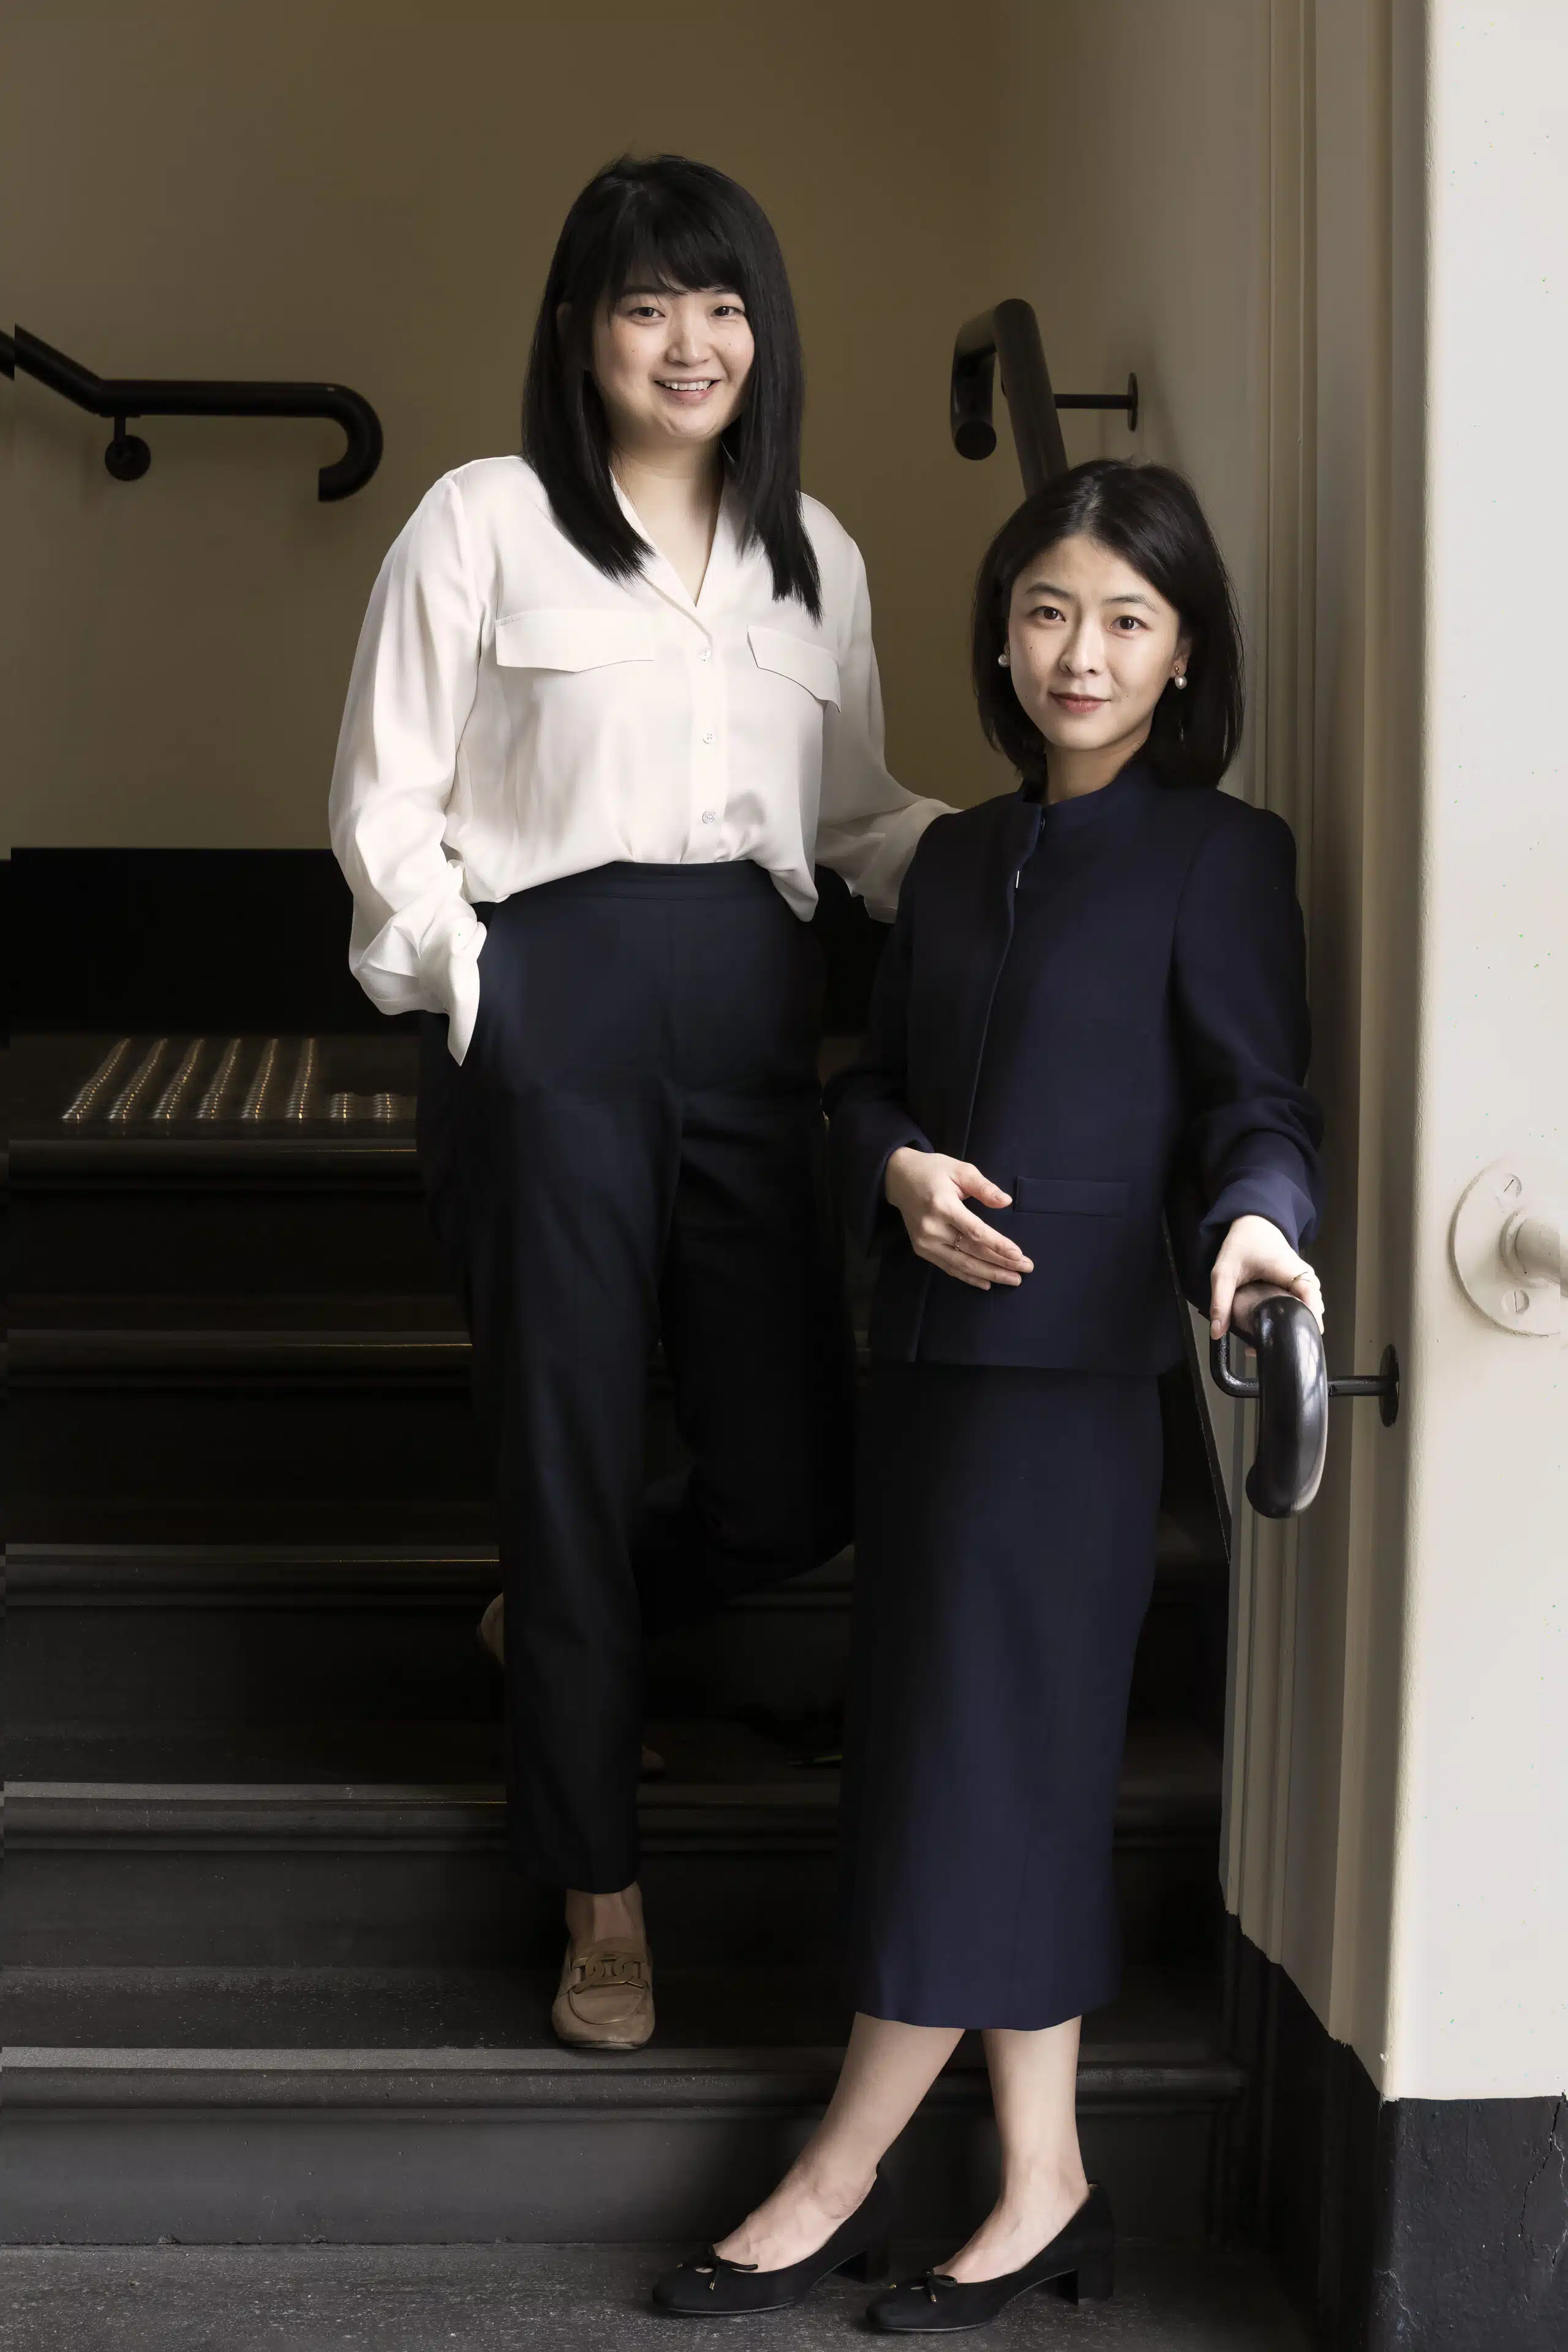 two women in monochrome clothing standing on stairs